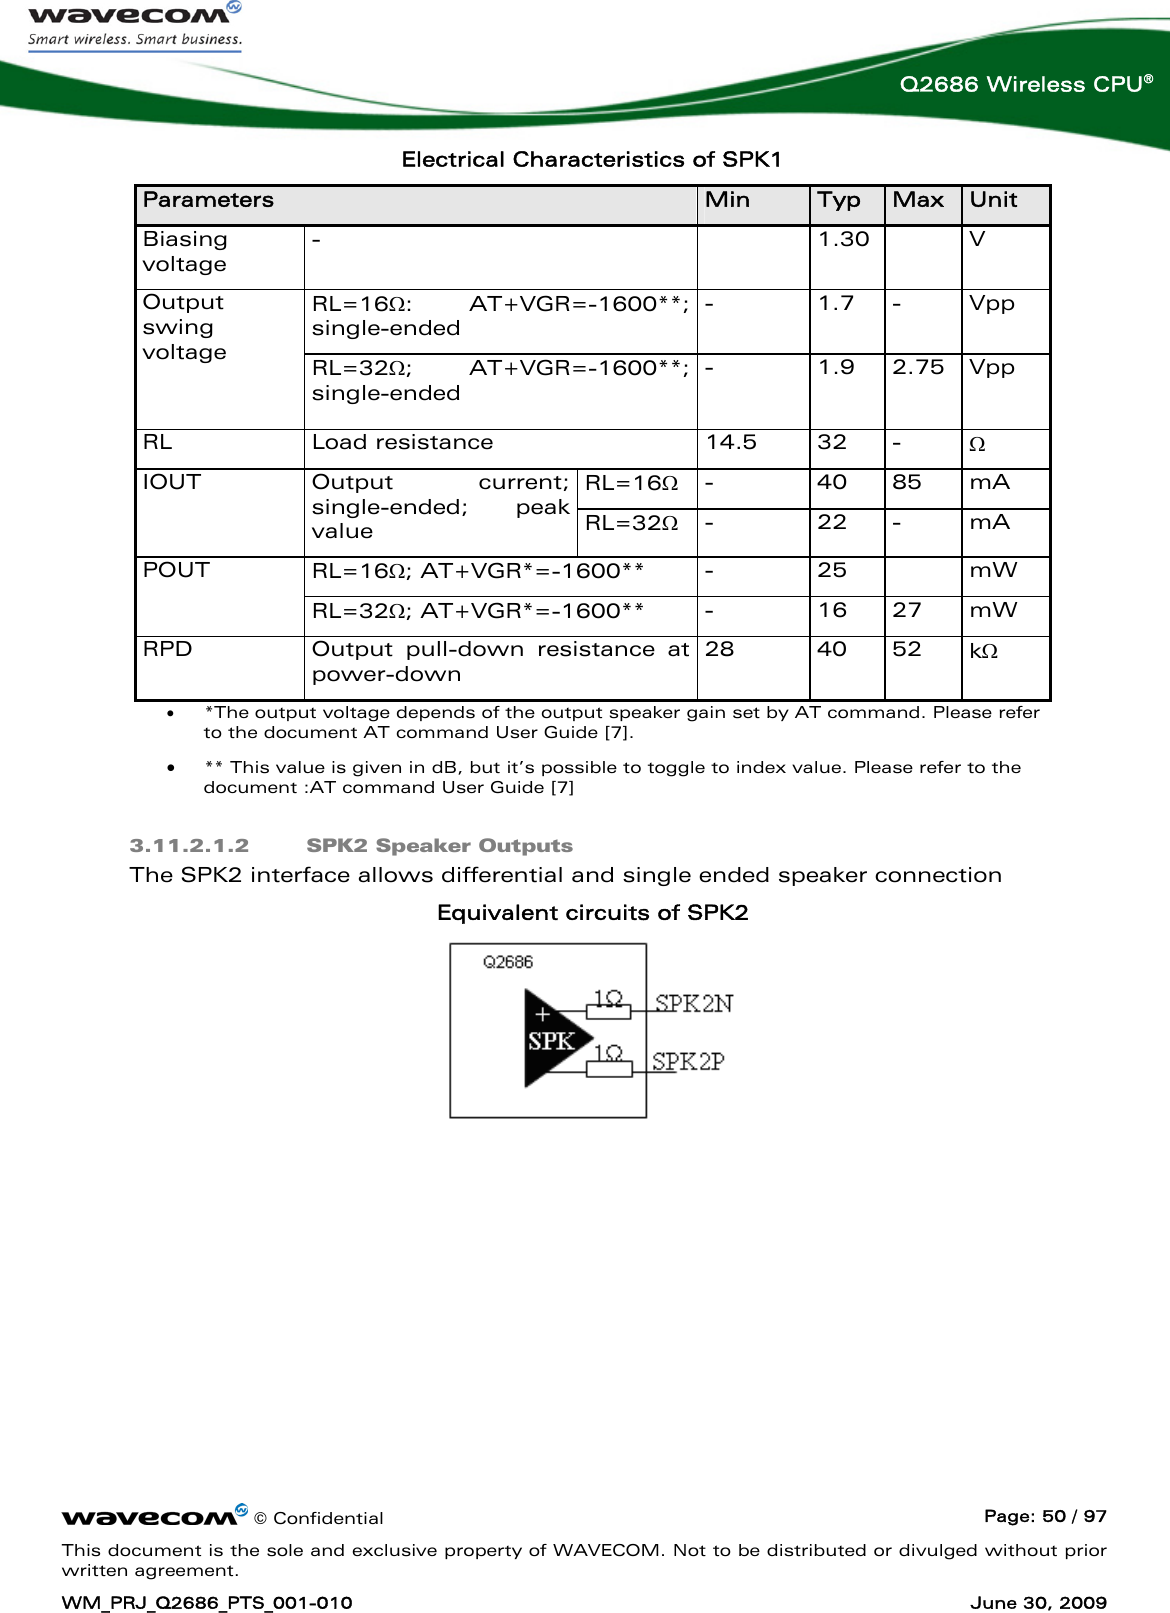      © Confidential  Page: 50 / 97 This document is the sole and exclusive property of WAVECOM. Not to be distributed or divulged without prior written agreement. WM_PRJ_Q2686_PTS_001-010  June 30, 2009  Q2686 Wireless CPU® Electrical Characteristics of SPK1 Parameters  Min  Typ  Max  Unit Biasing voltage -  1.30  V RL=16Ω: AT+VGR=-1600**; single-ended - 1.7 - Vpp Output swing voltage  RL=32Ω; AT+VGR=-1600**; single-ended - 1.9 2.75  Vpp RL Load resistance  14.5 32 - Ω RL=16Ω - 40 85 mA IOUT Output current; single-ended; peak value  RL=32Ω - 22 - mA RL=16Ω; AT+VGR*=-1600**  - 25  mW POUT RL=32Ω; AT+VGR*=-1600**  - 16 27 mW RPD  Output pull-down resistance at power-down 28 40 52 kΩ • *The output voltage depends of the output speaker gain set by AT command. Please refer to the document AT command User Guide [7]. • ** This value is given in dB, but it’s possible to toggle to index value. Please refer to the document :AT command User Guide [7] 3.11.2.1.2 SPK2 Speaker Outputs  The SPK2 interface allows differential and single ended speaker connection Equivalent circuits of SPK2  